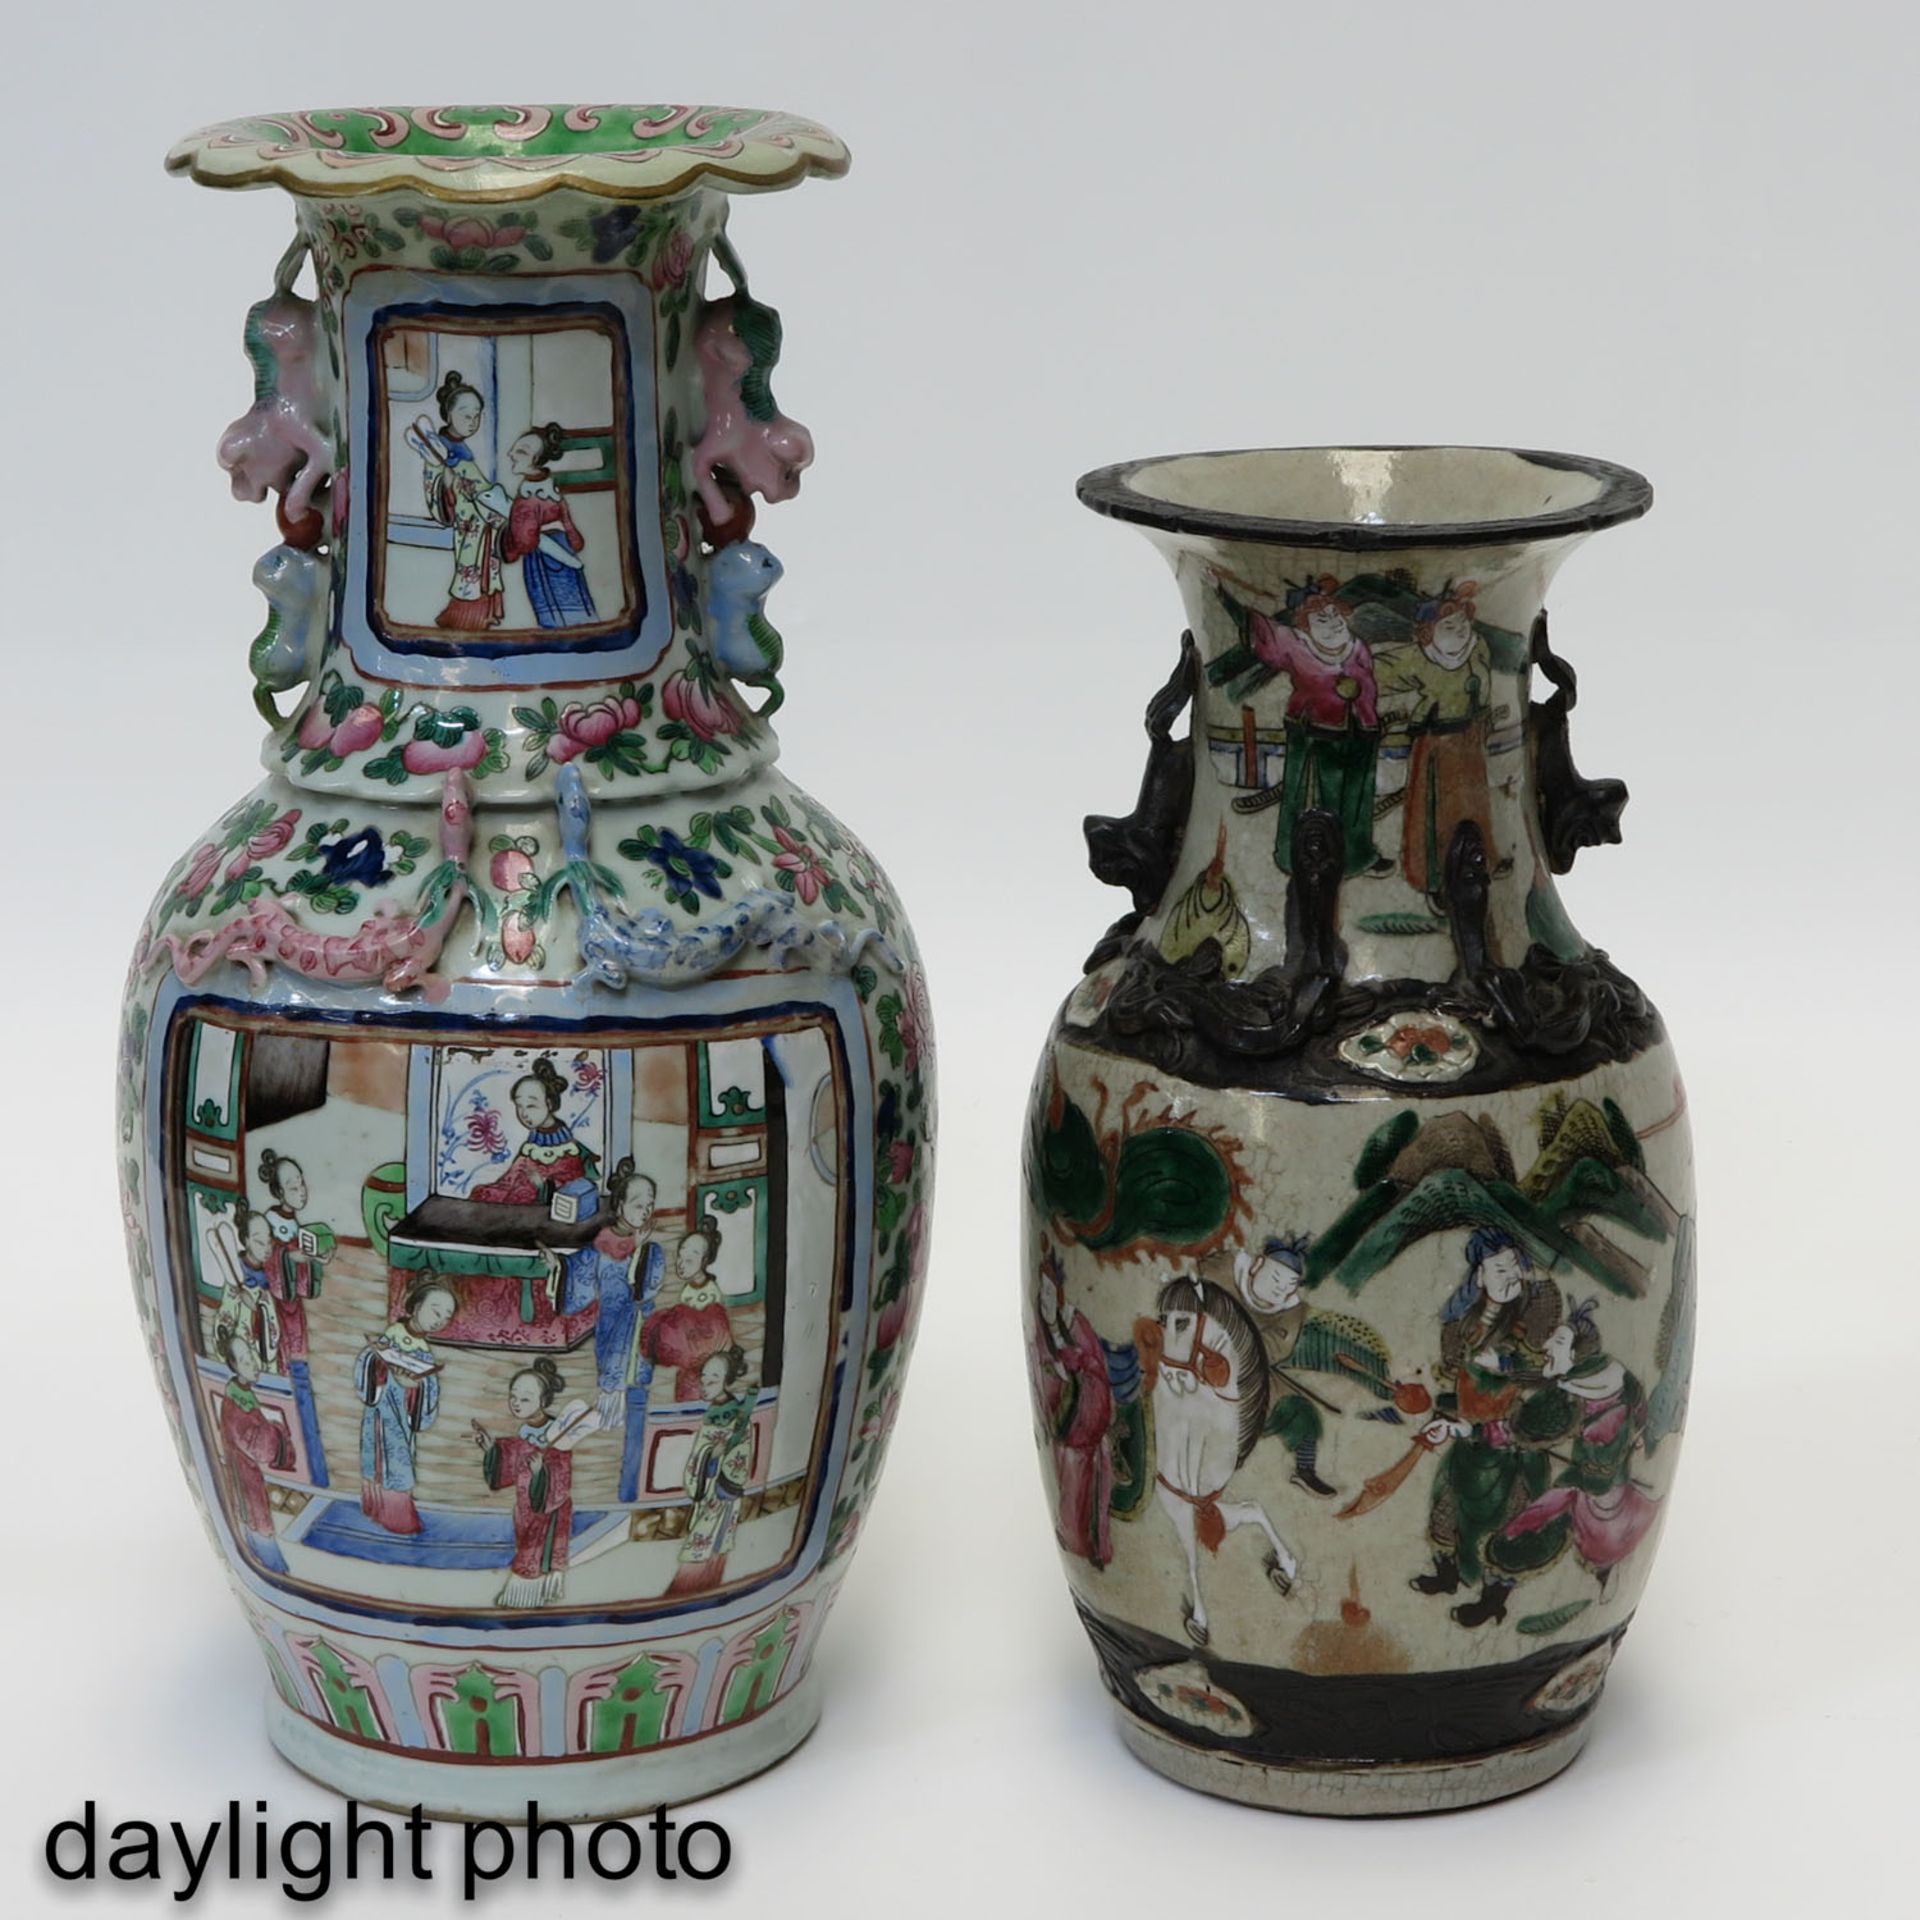 A Nanking and Cantonese Vase - Image 7 of 10